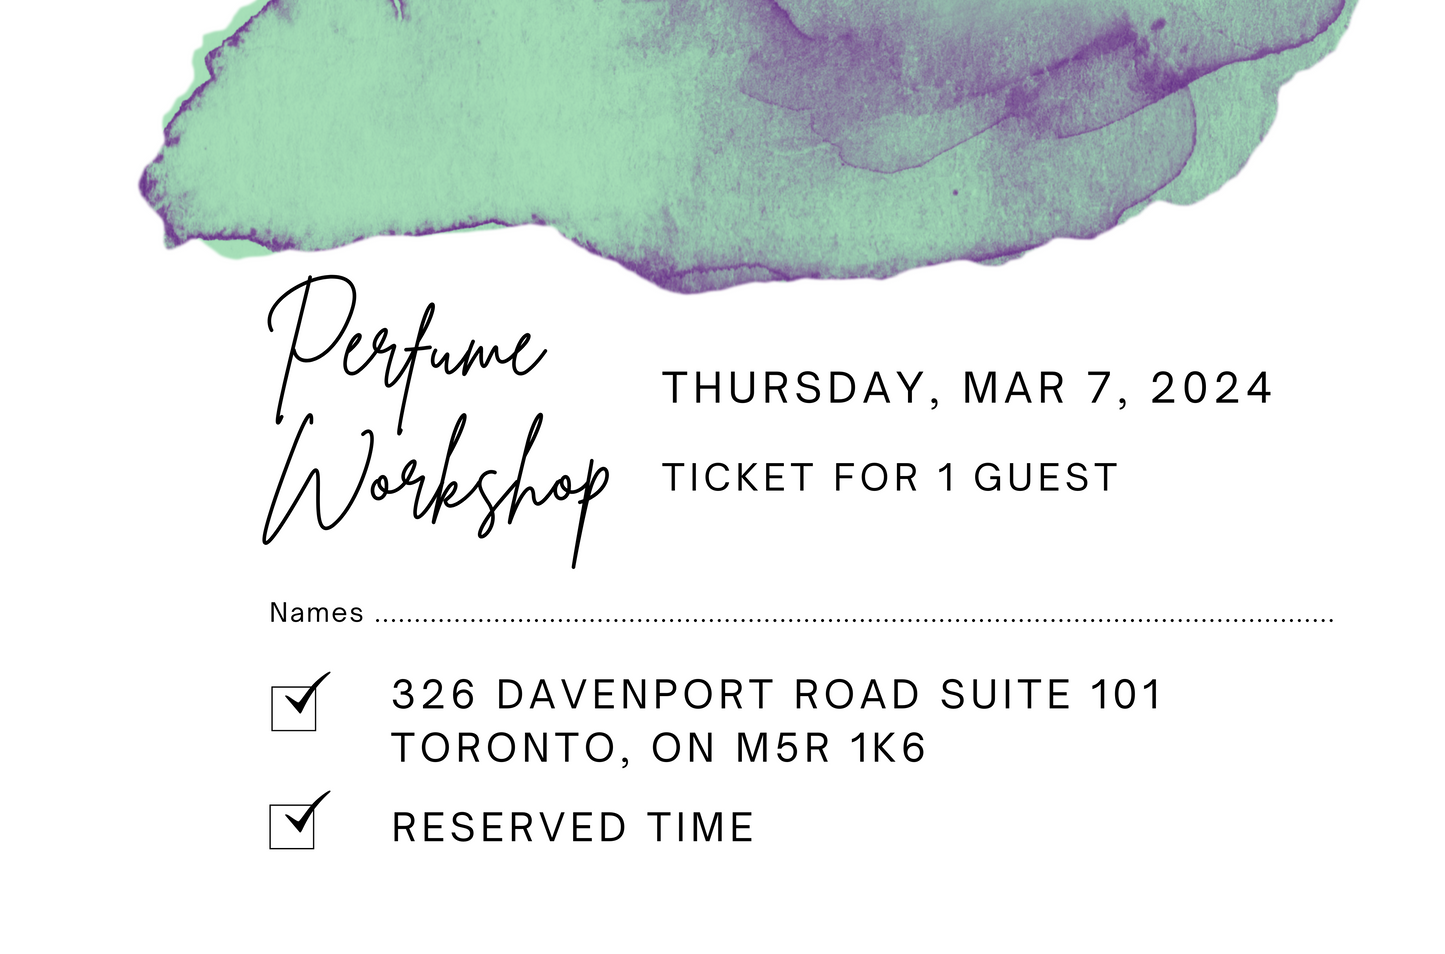 March 7th, 2024 Perfume/Cologne Workshop Session For 1 Guest